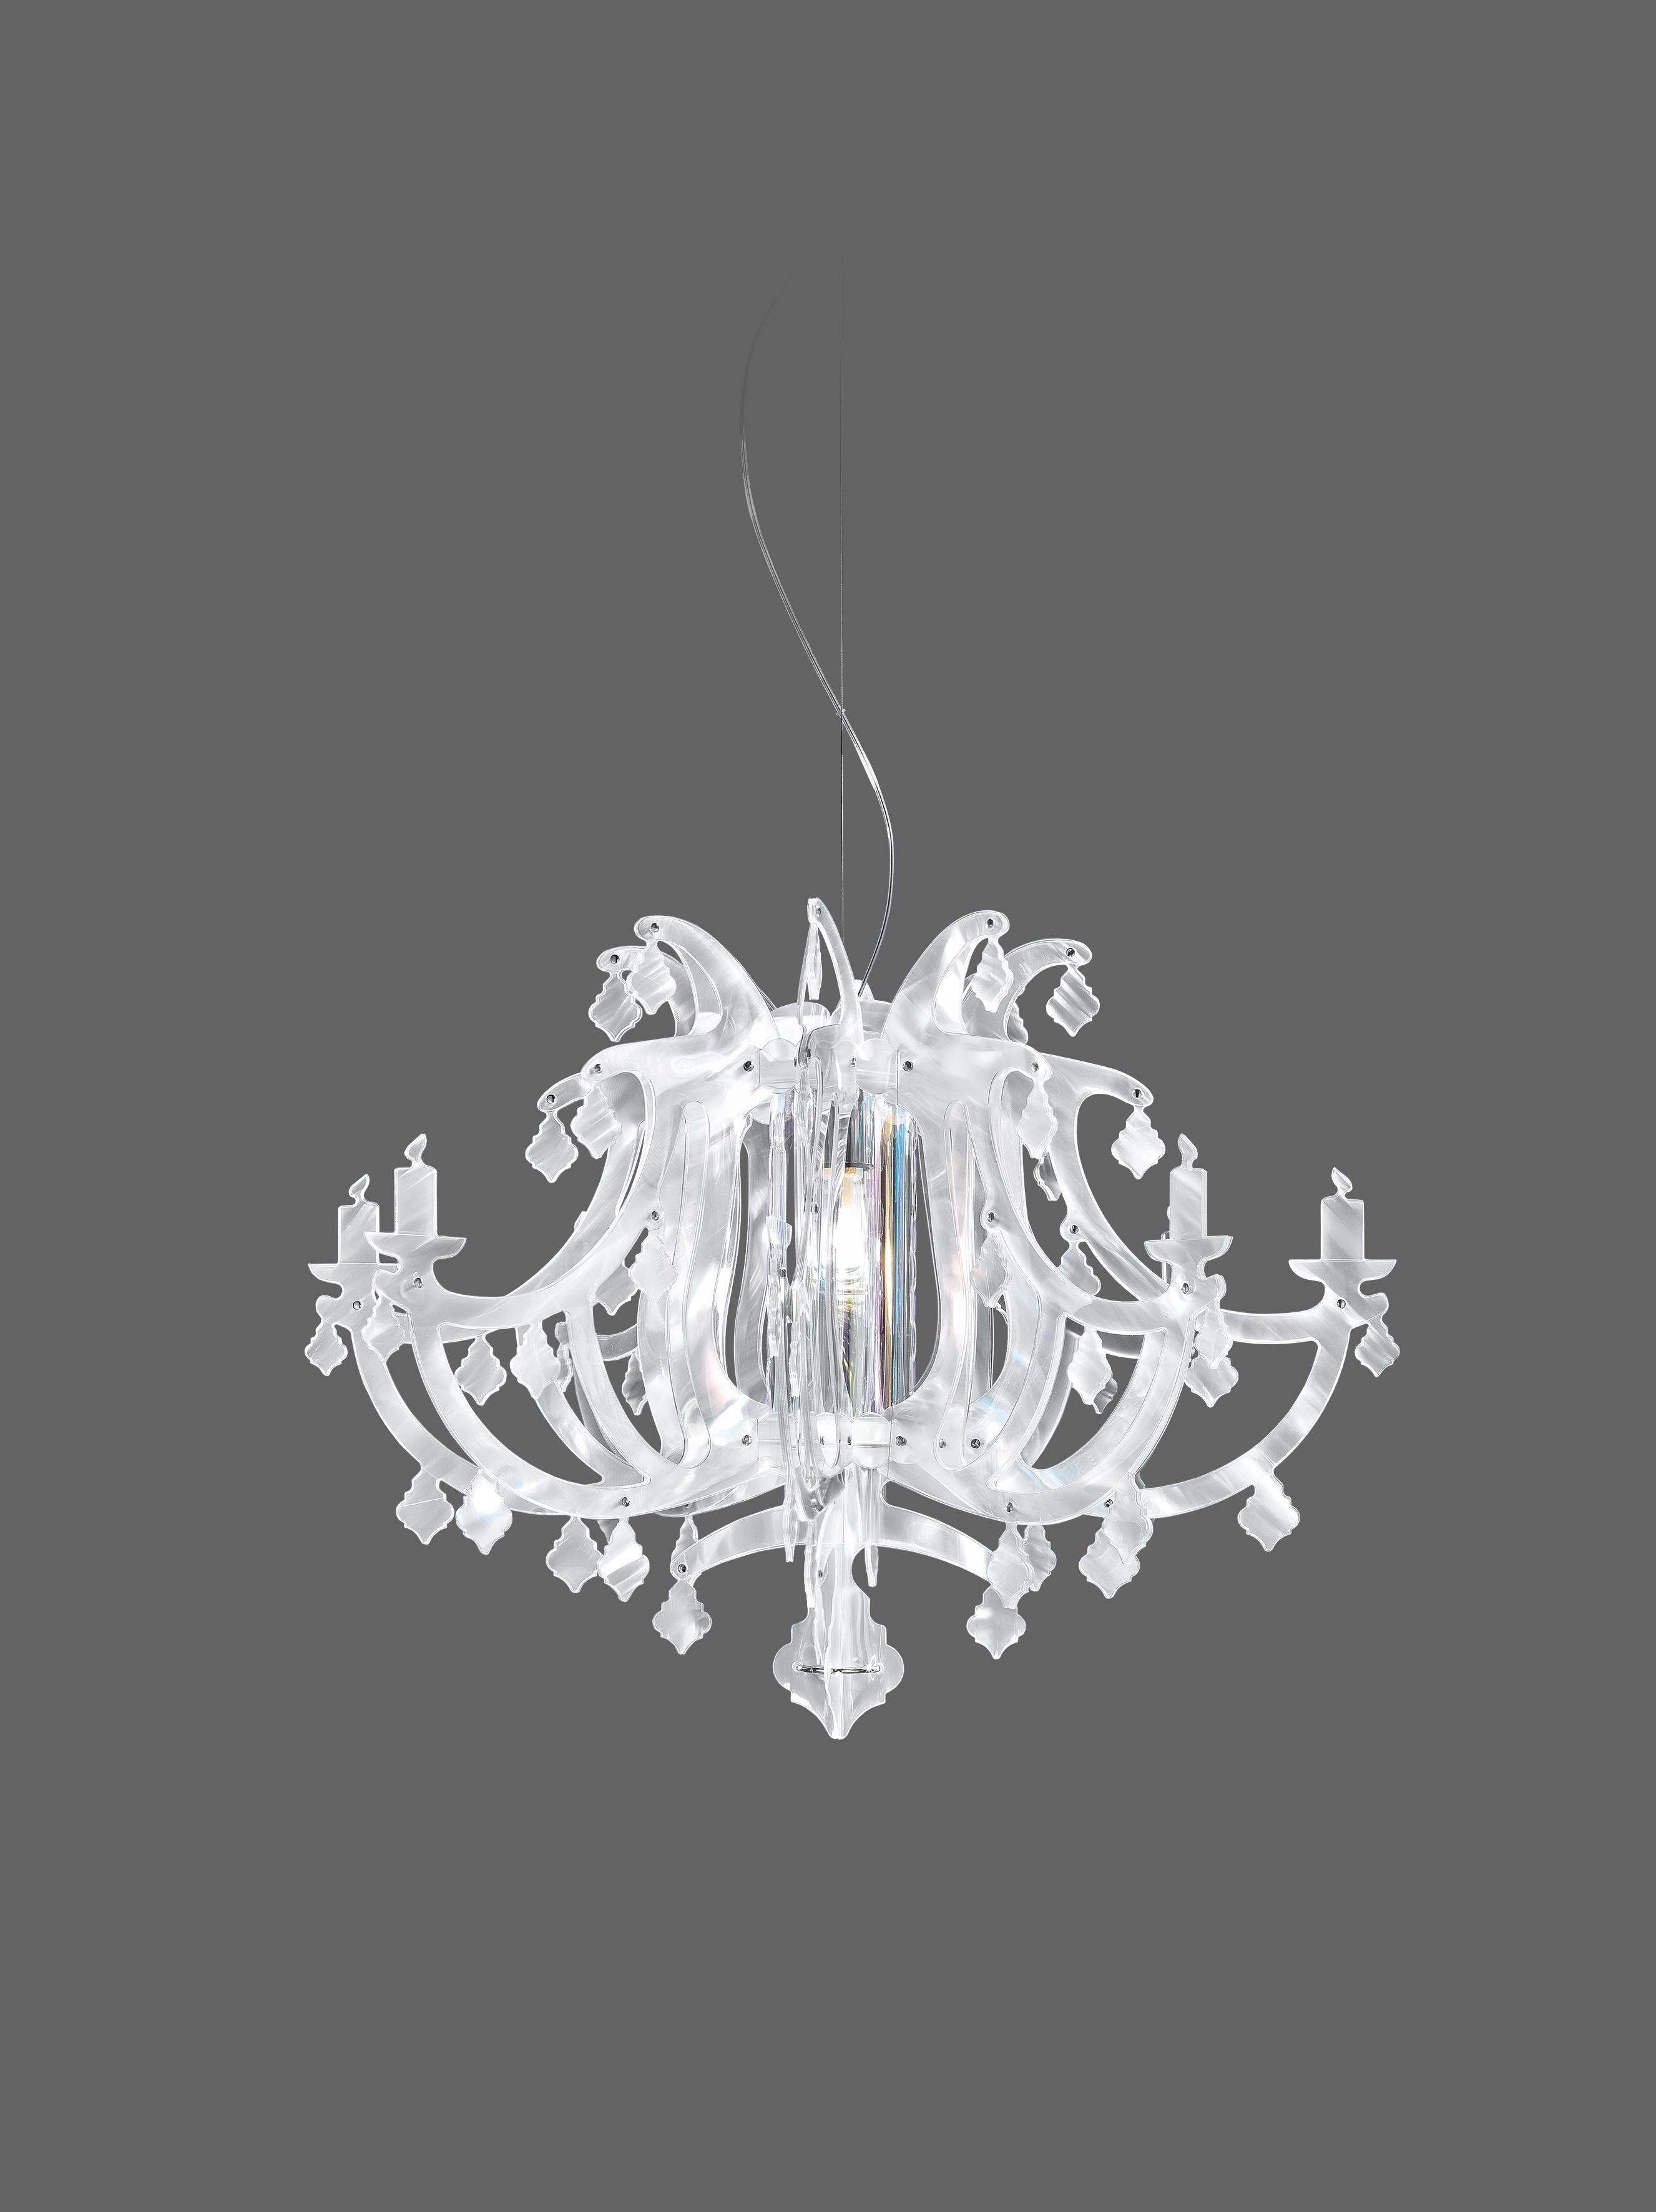 A classic 8-arm chandelier underwent digital evolution; Ginetta’s sumptuous modern shape extends from a central light source that casts elegant, refined reflections, blending into both modern and aristocratic atmospheres. The cylindric diffusor in